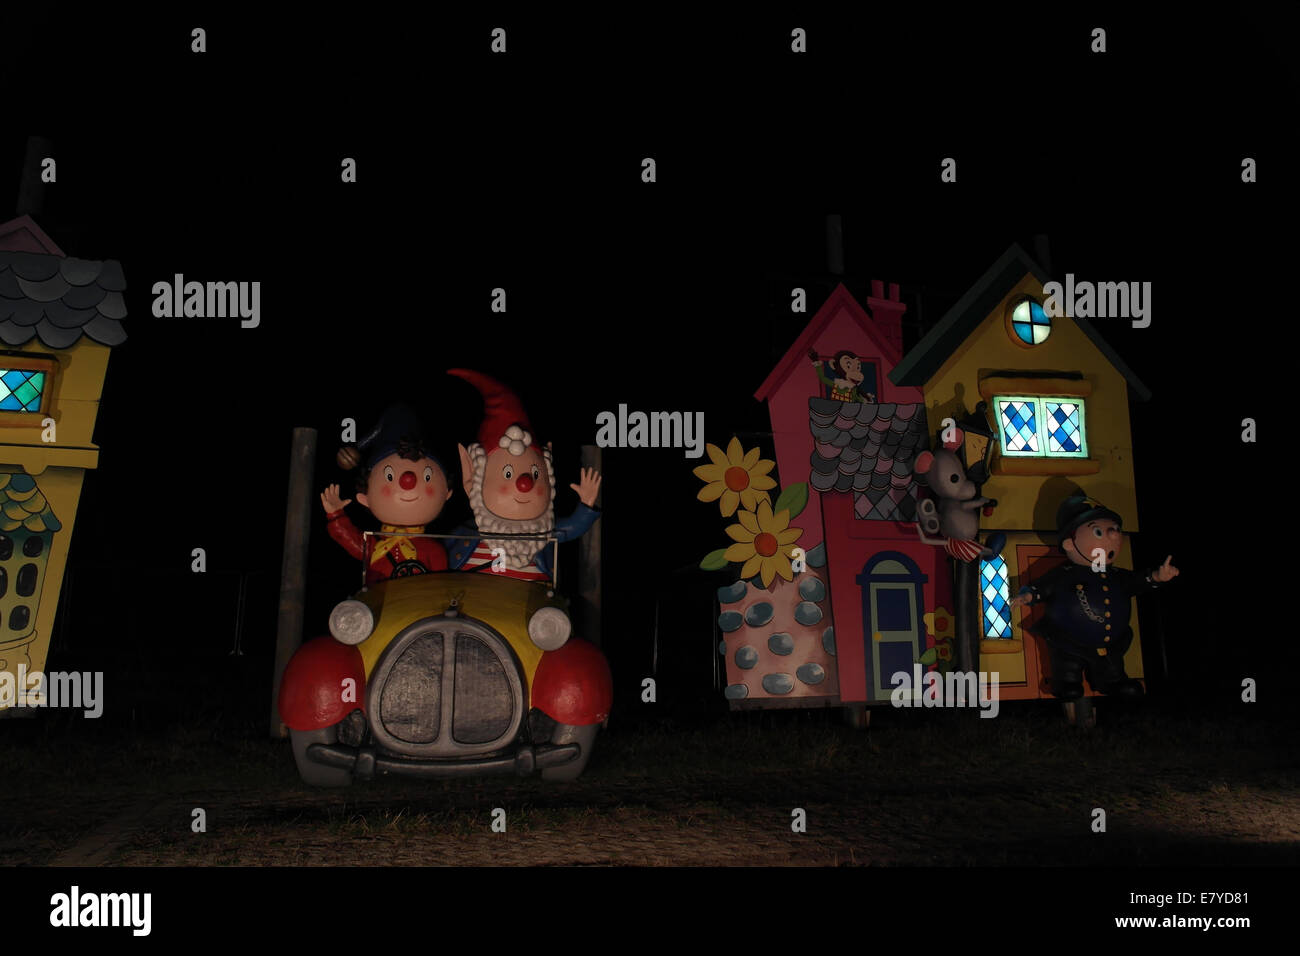 Night view Noddy Tableau, with Noddy and Big Ears sitting car, and PC Plod standing front house, Blackpool Illuminations, UK Stock Photo